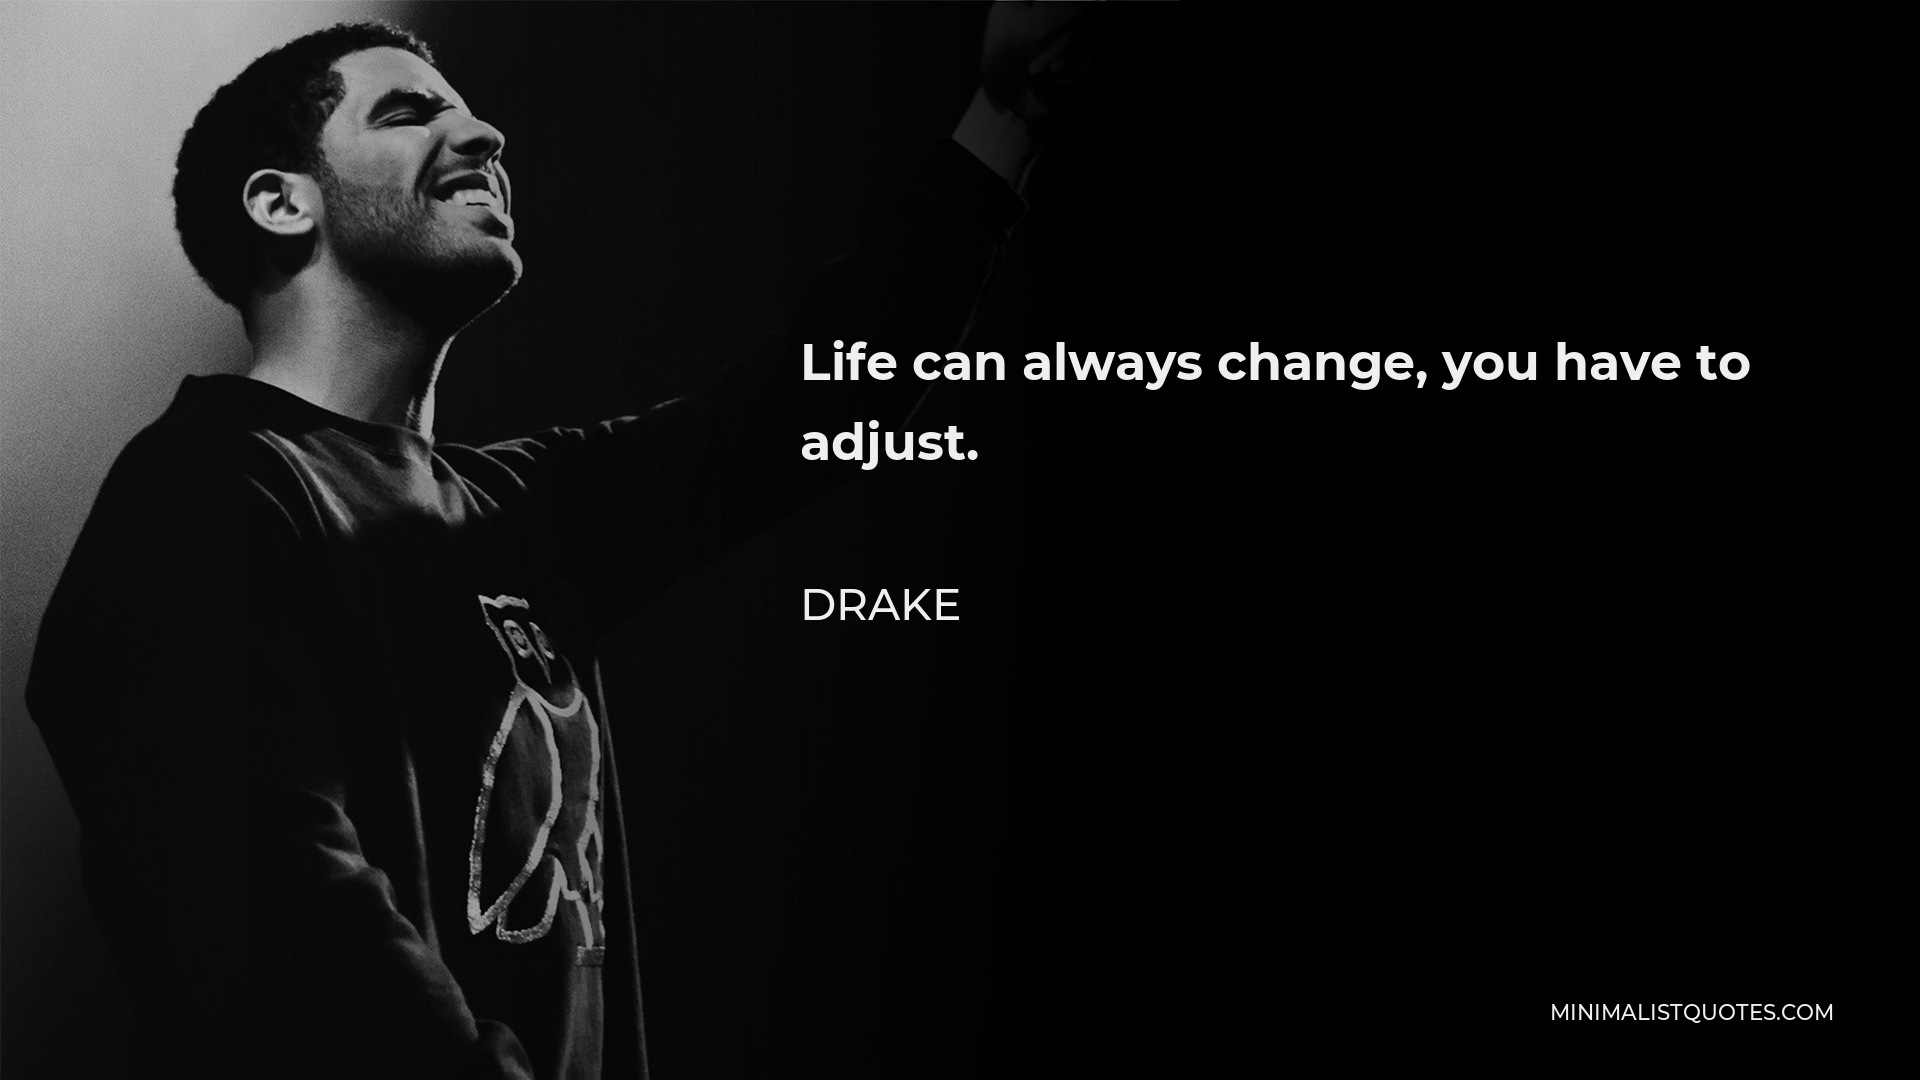 Drake Quote - Life can always change, you have to adjust.